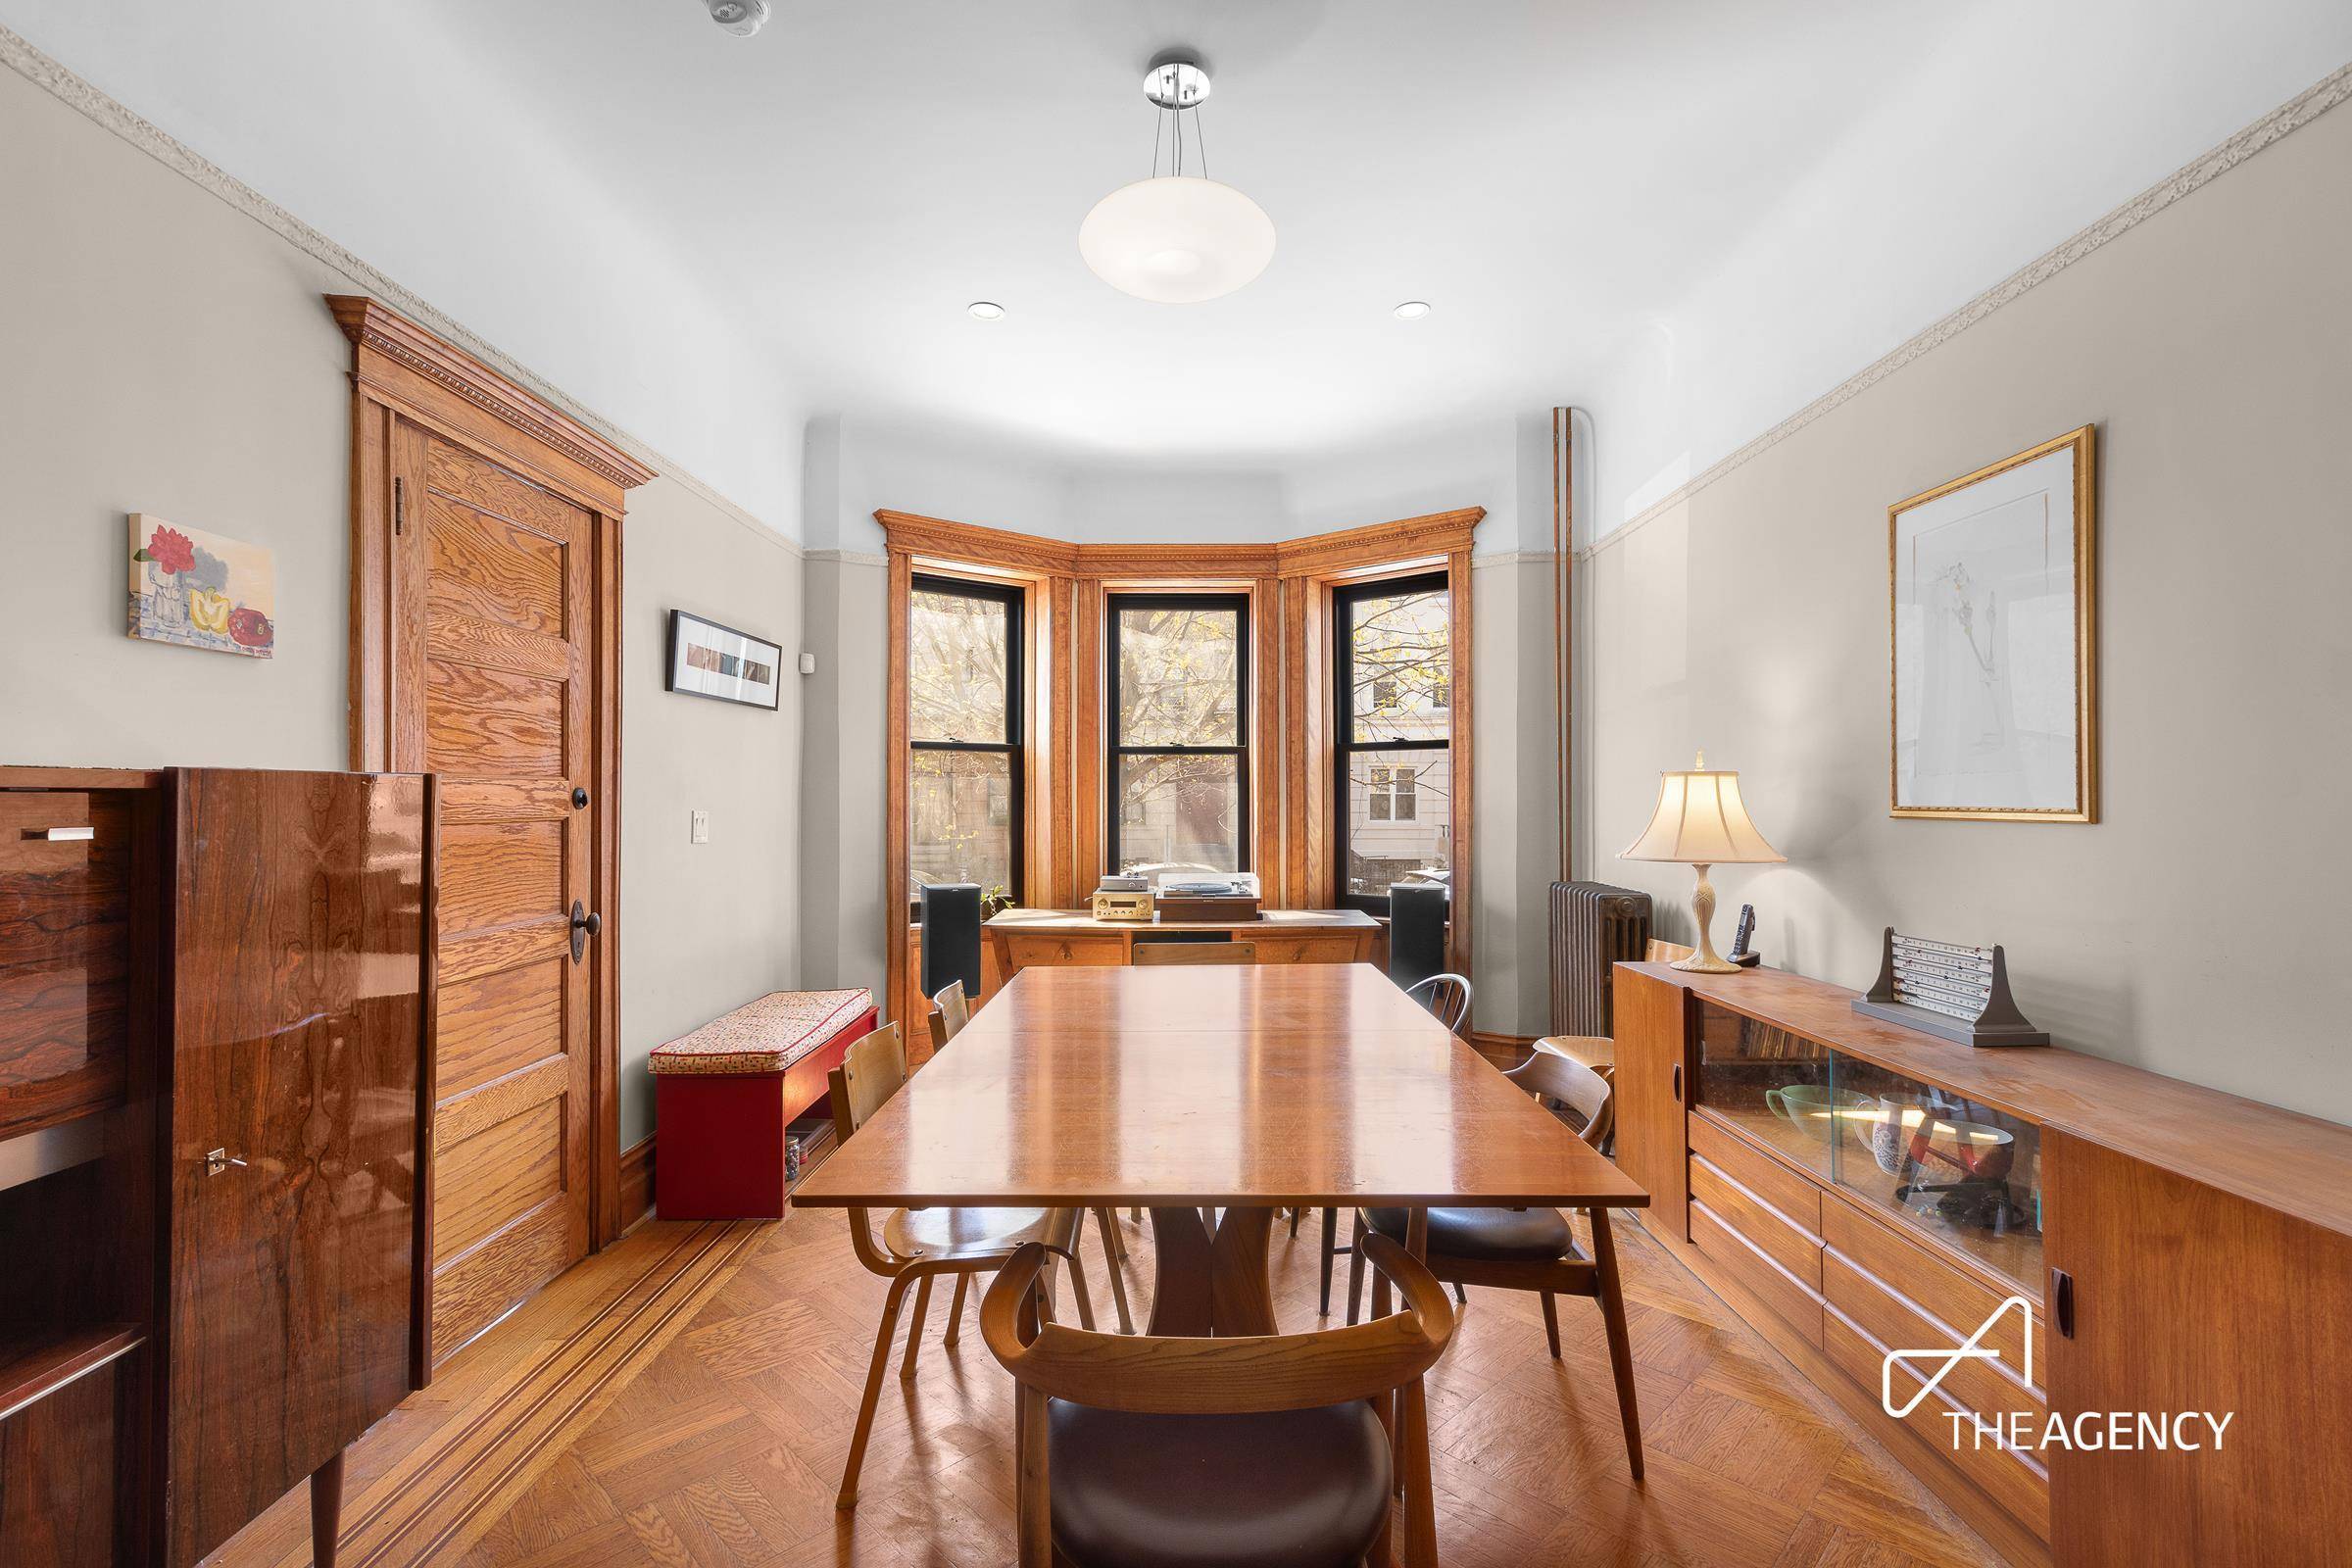 Nestled within the charming streets of Crown Heights, this impeccably restored barrel front brick two family townhouse exudes timeless elegance and modern comfort.